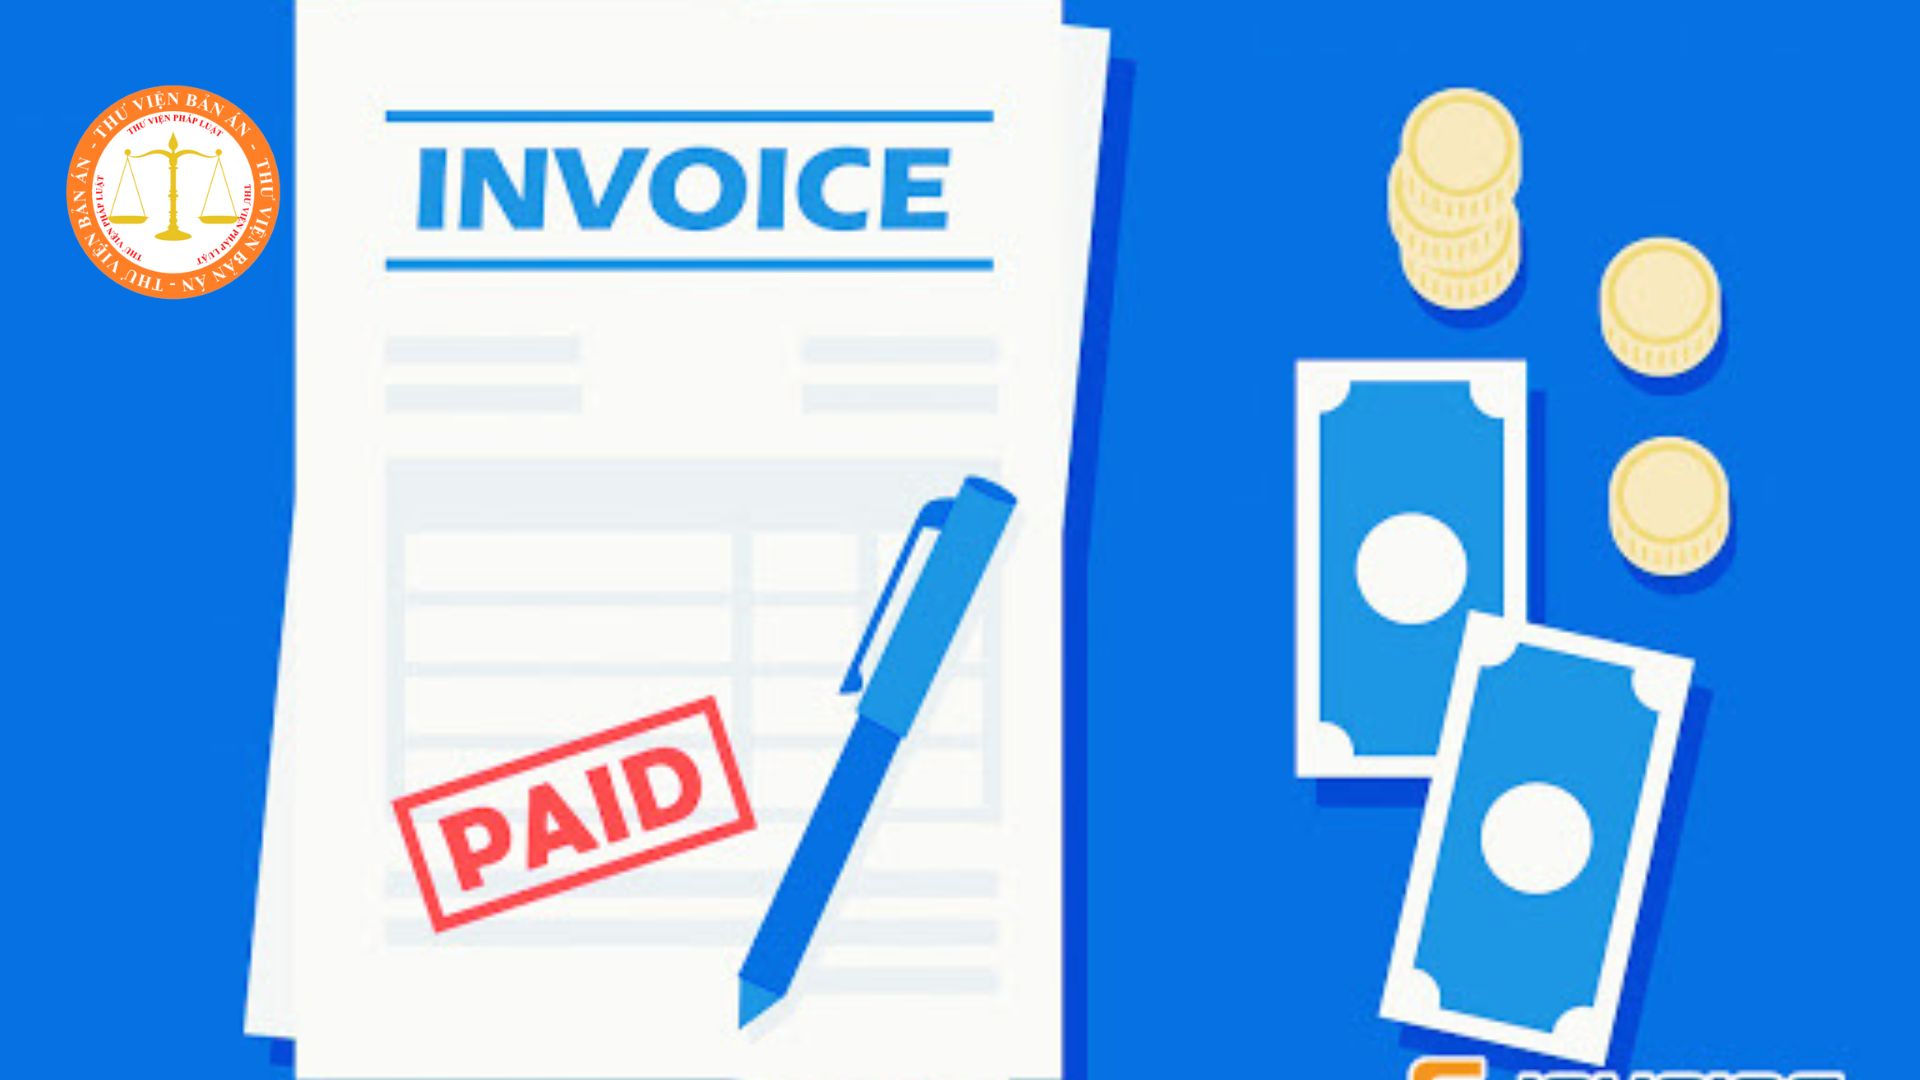 Instructions on procedures for destroying e-invoices in Vietnam